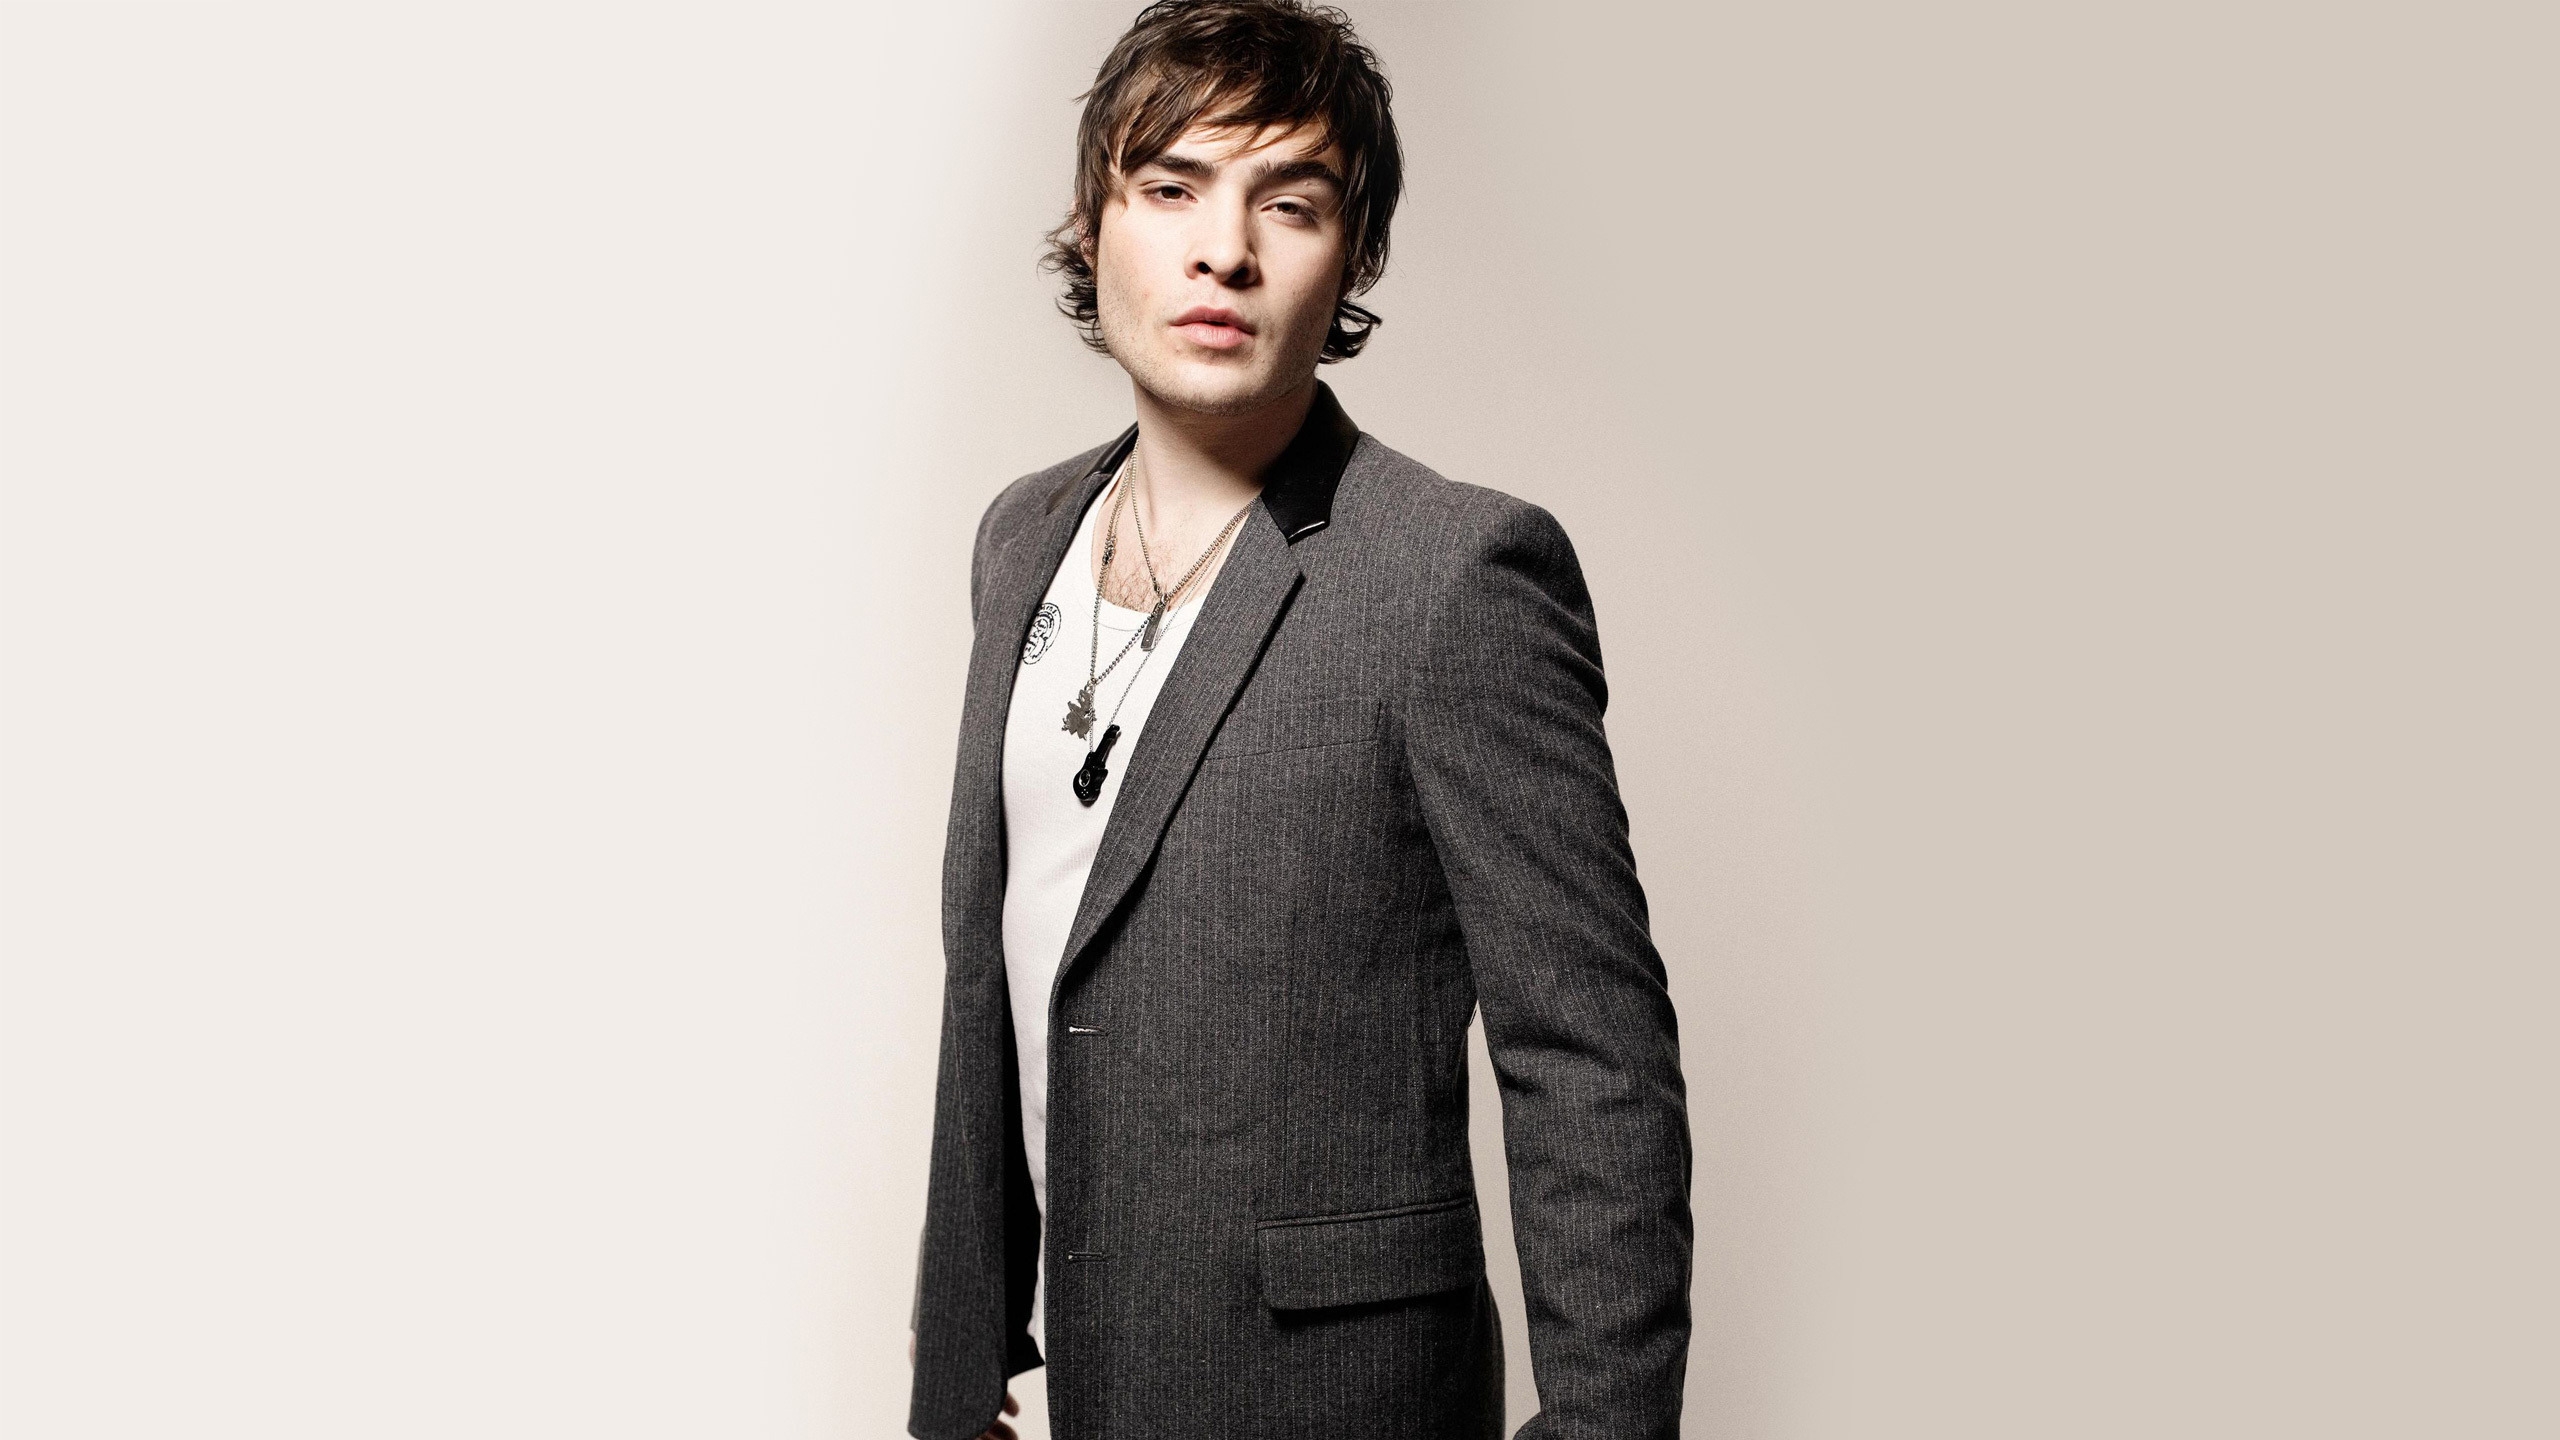 Ed Westwick Cool for 2560x1440 HDTV resolution